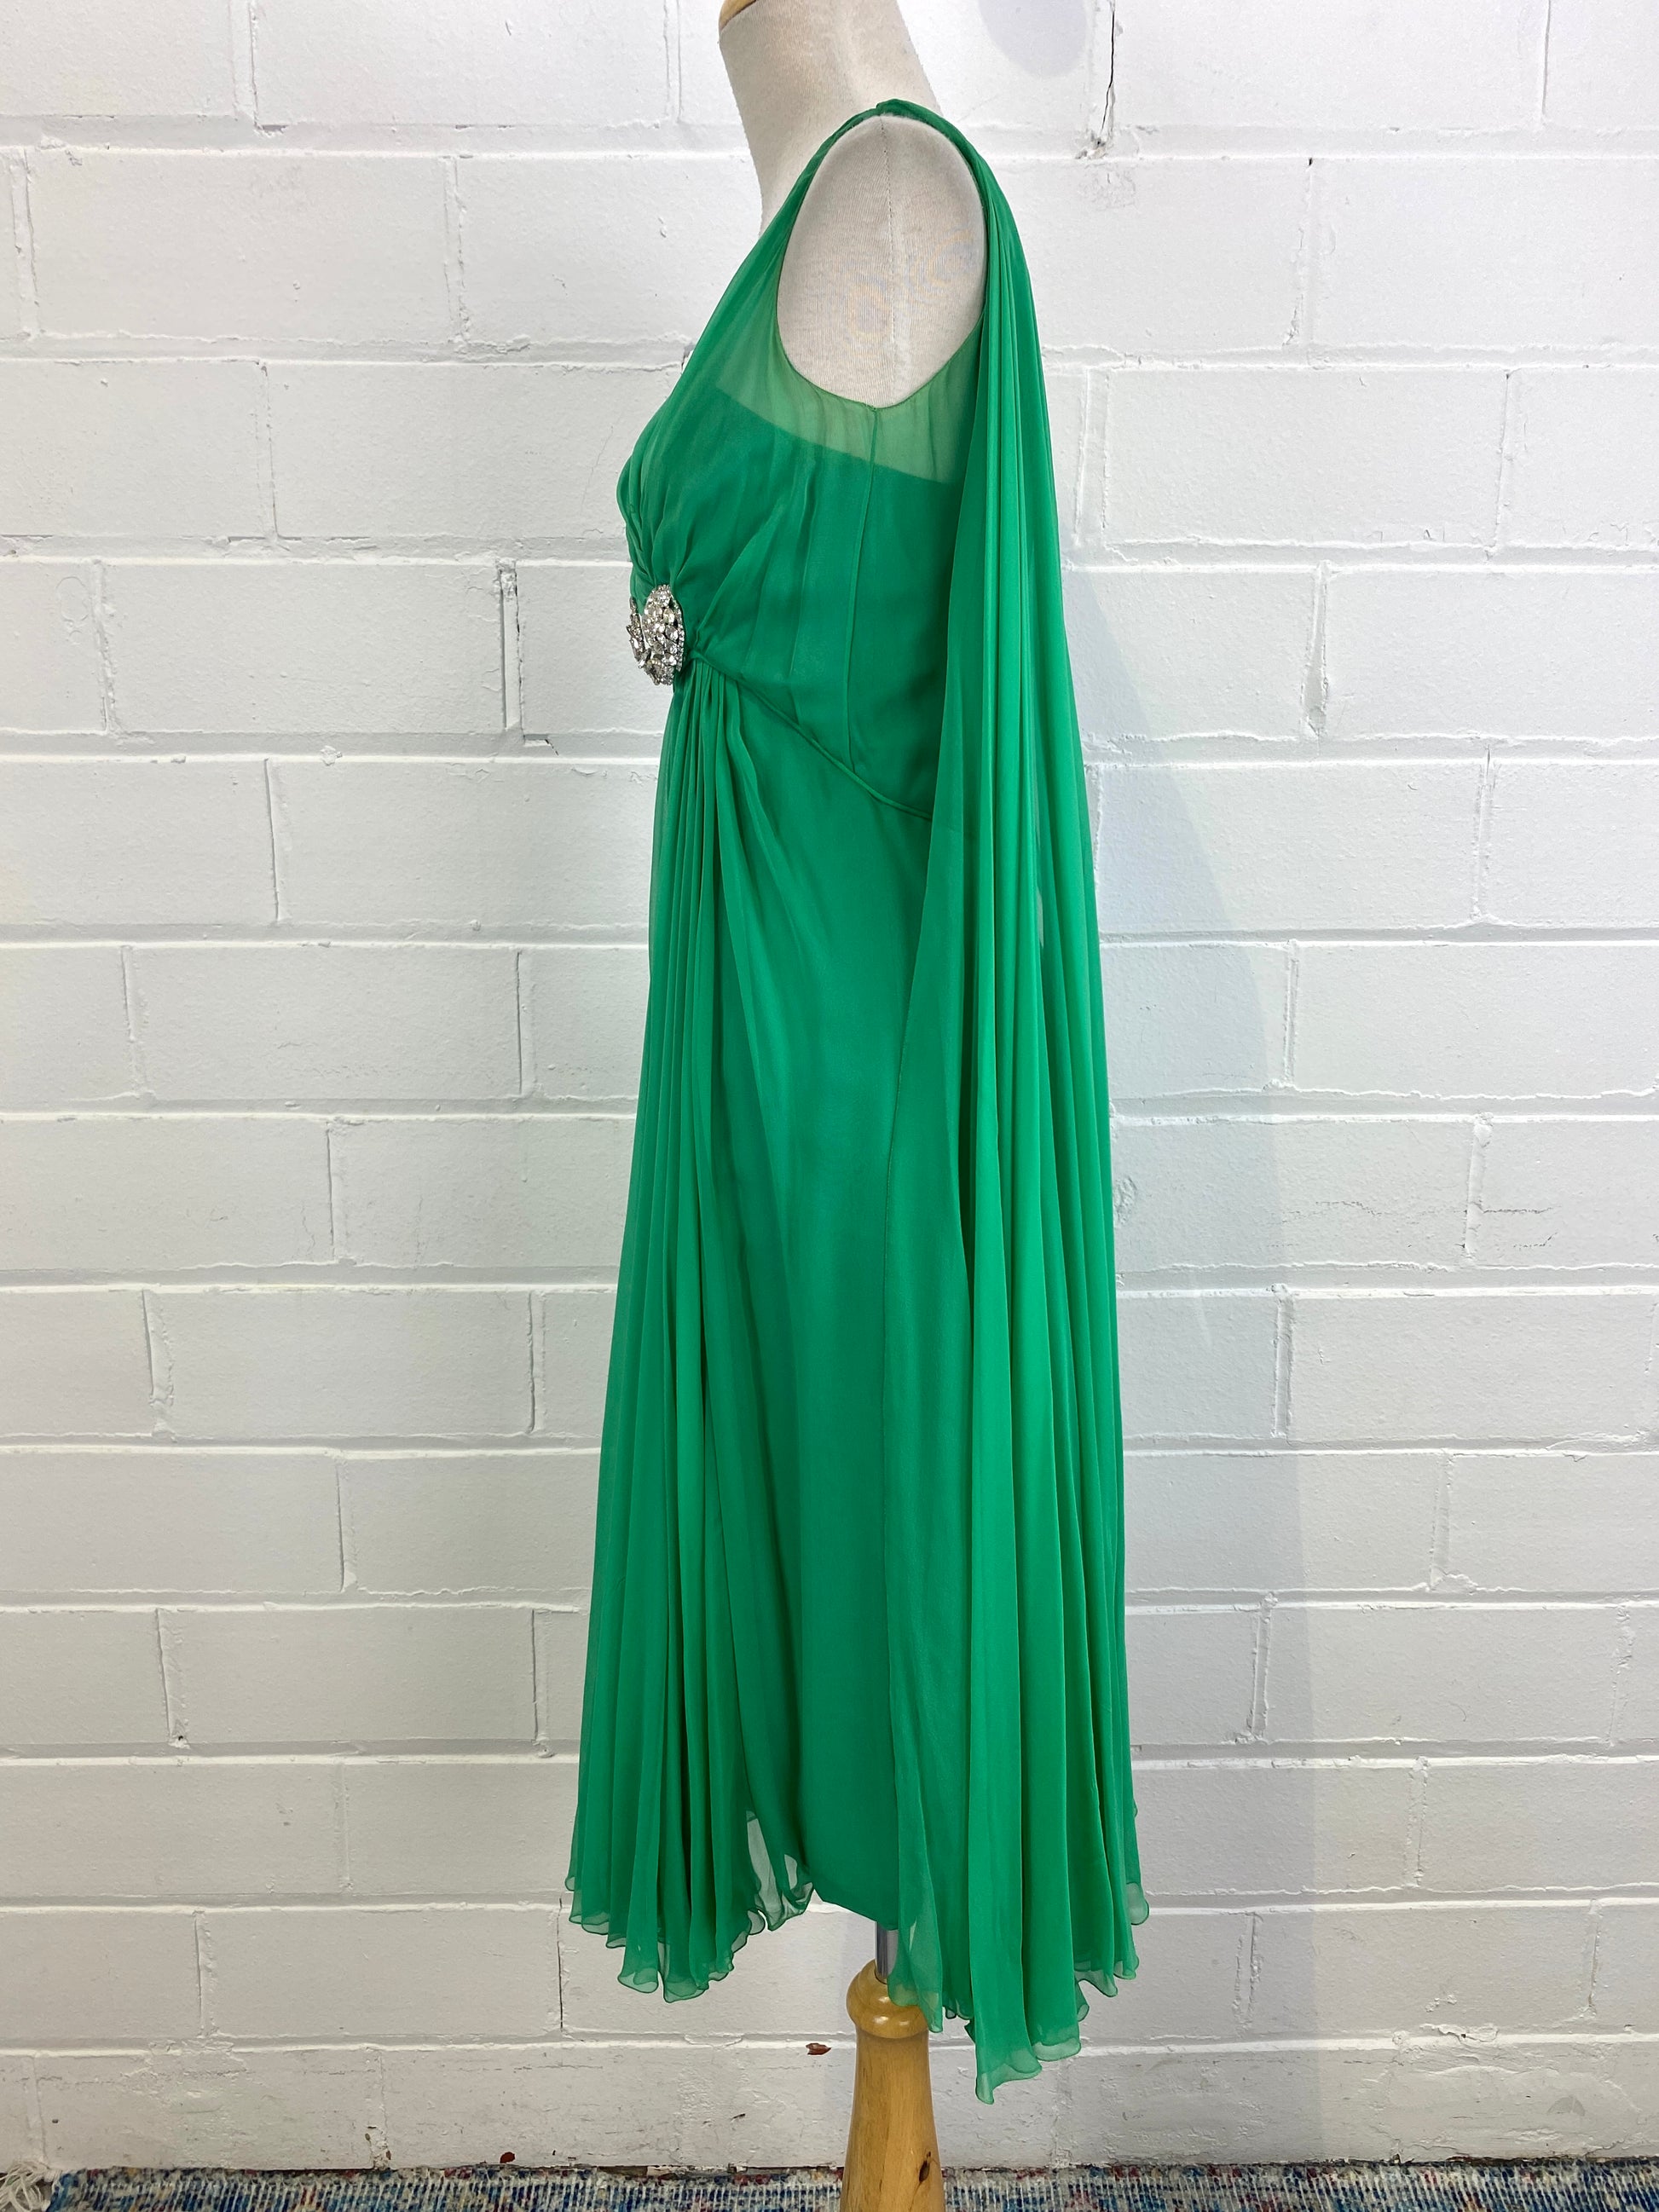 Vintage 70s Green Chiffon Cocktail Dress with Rhinestone Brooch, Small